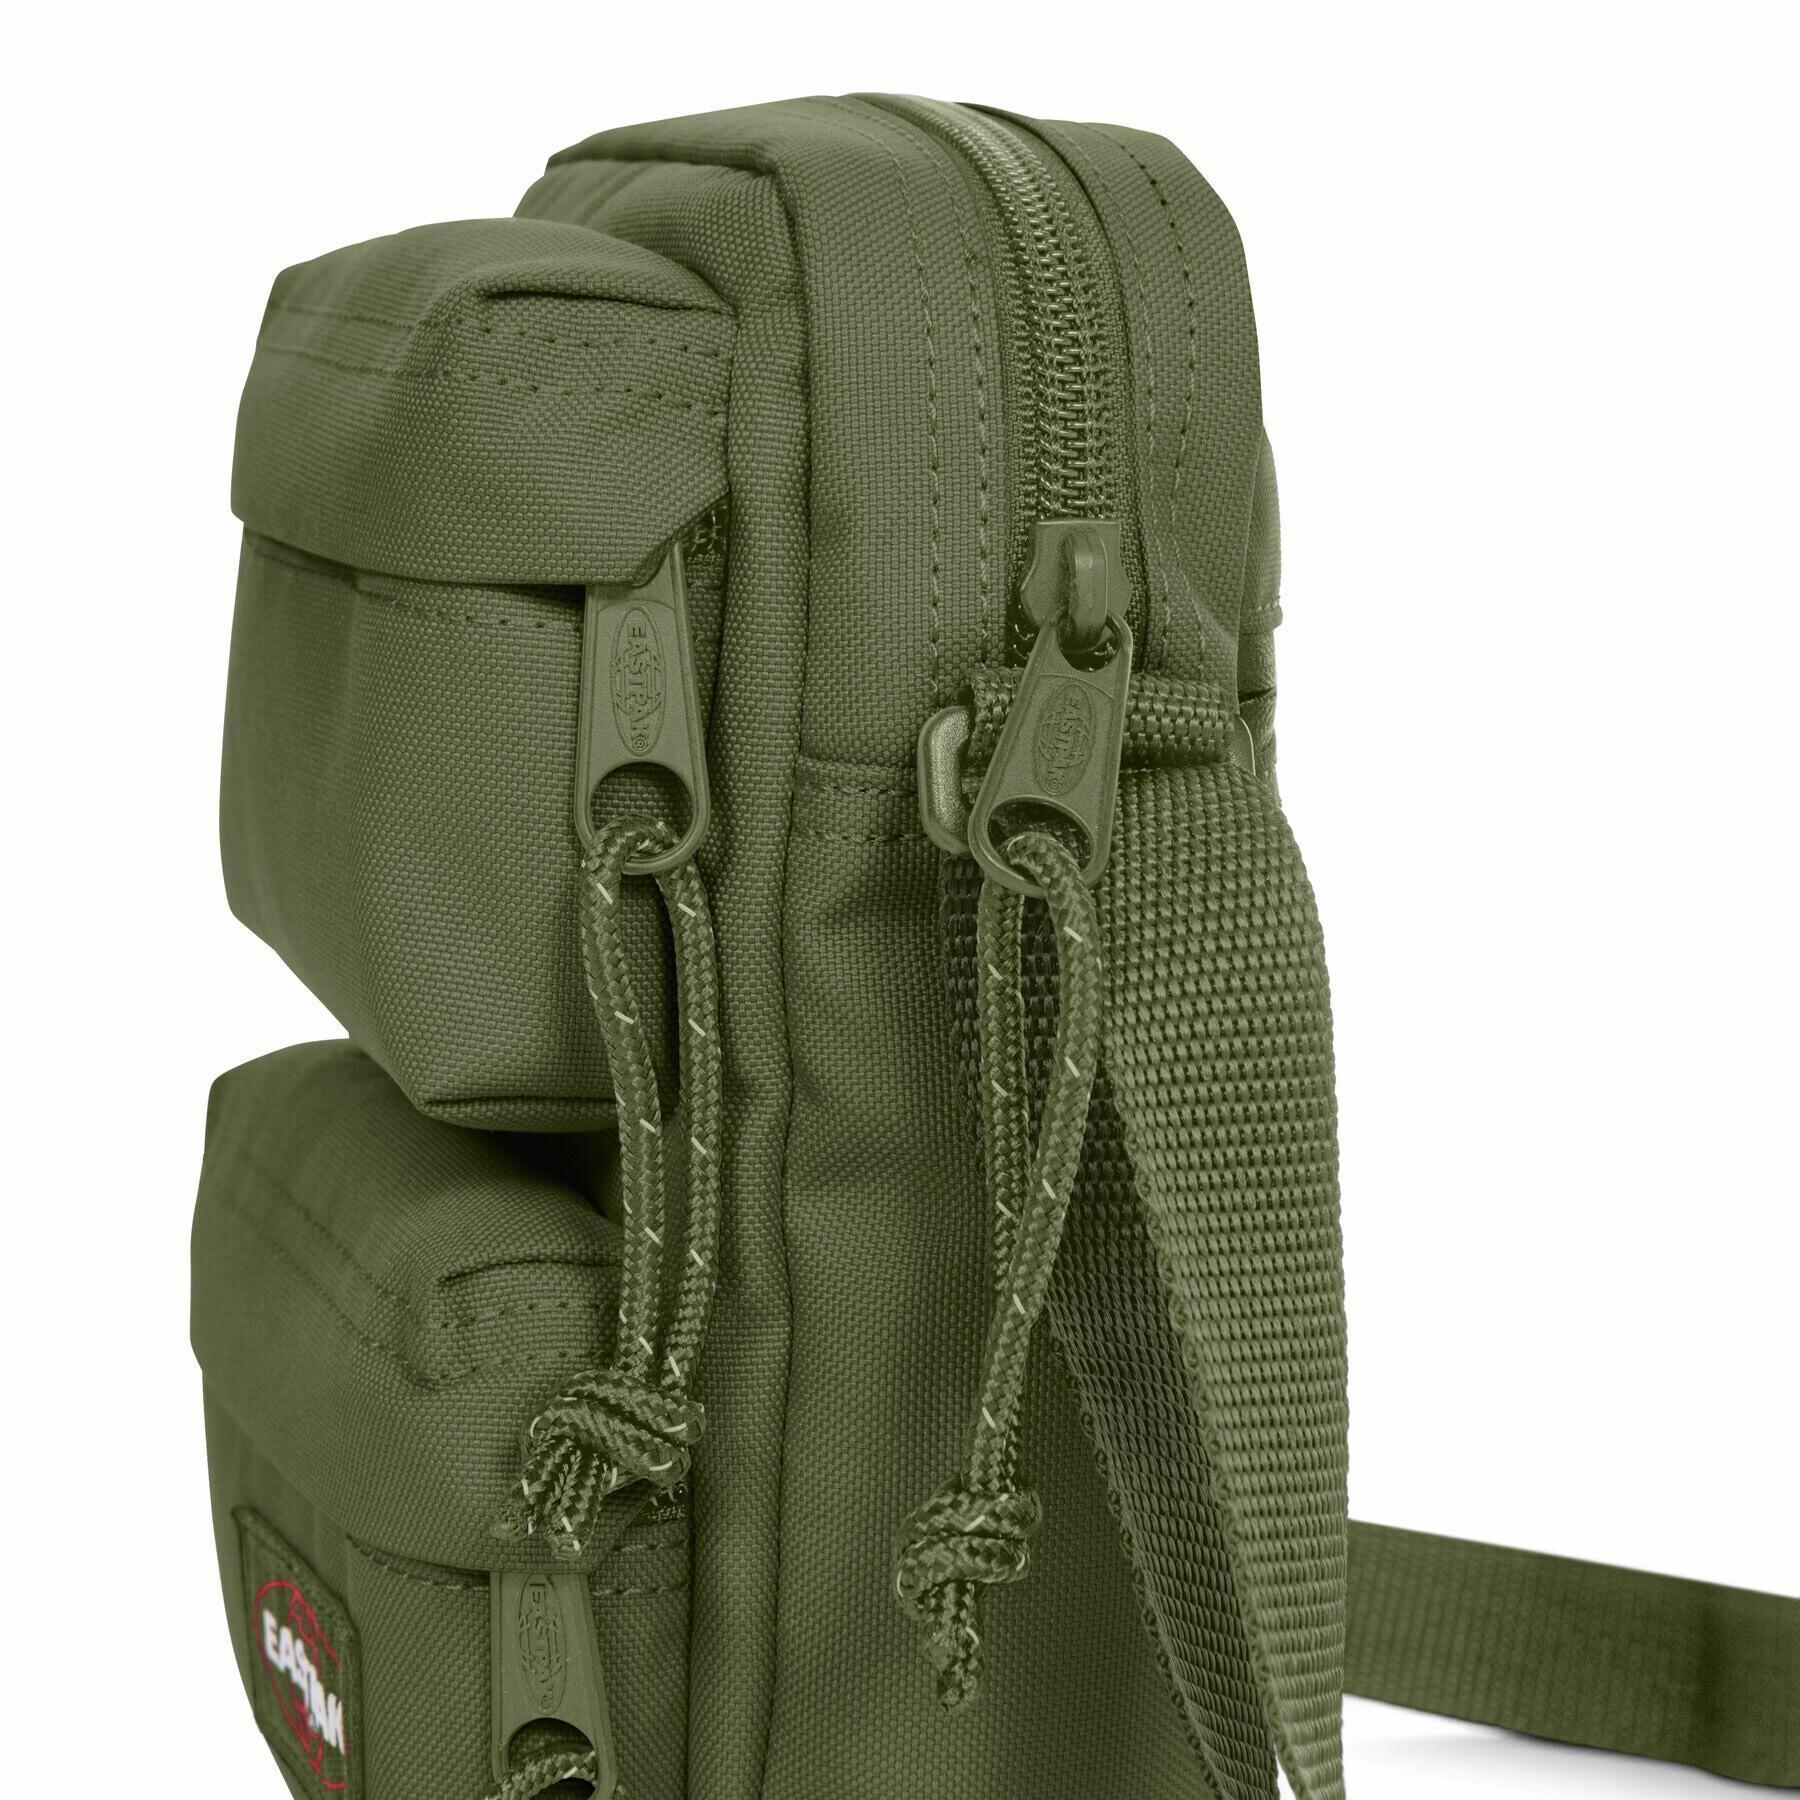 Sac bandoulière Eastpak The One Doubled